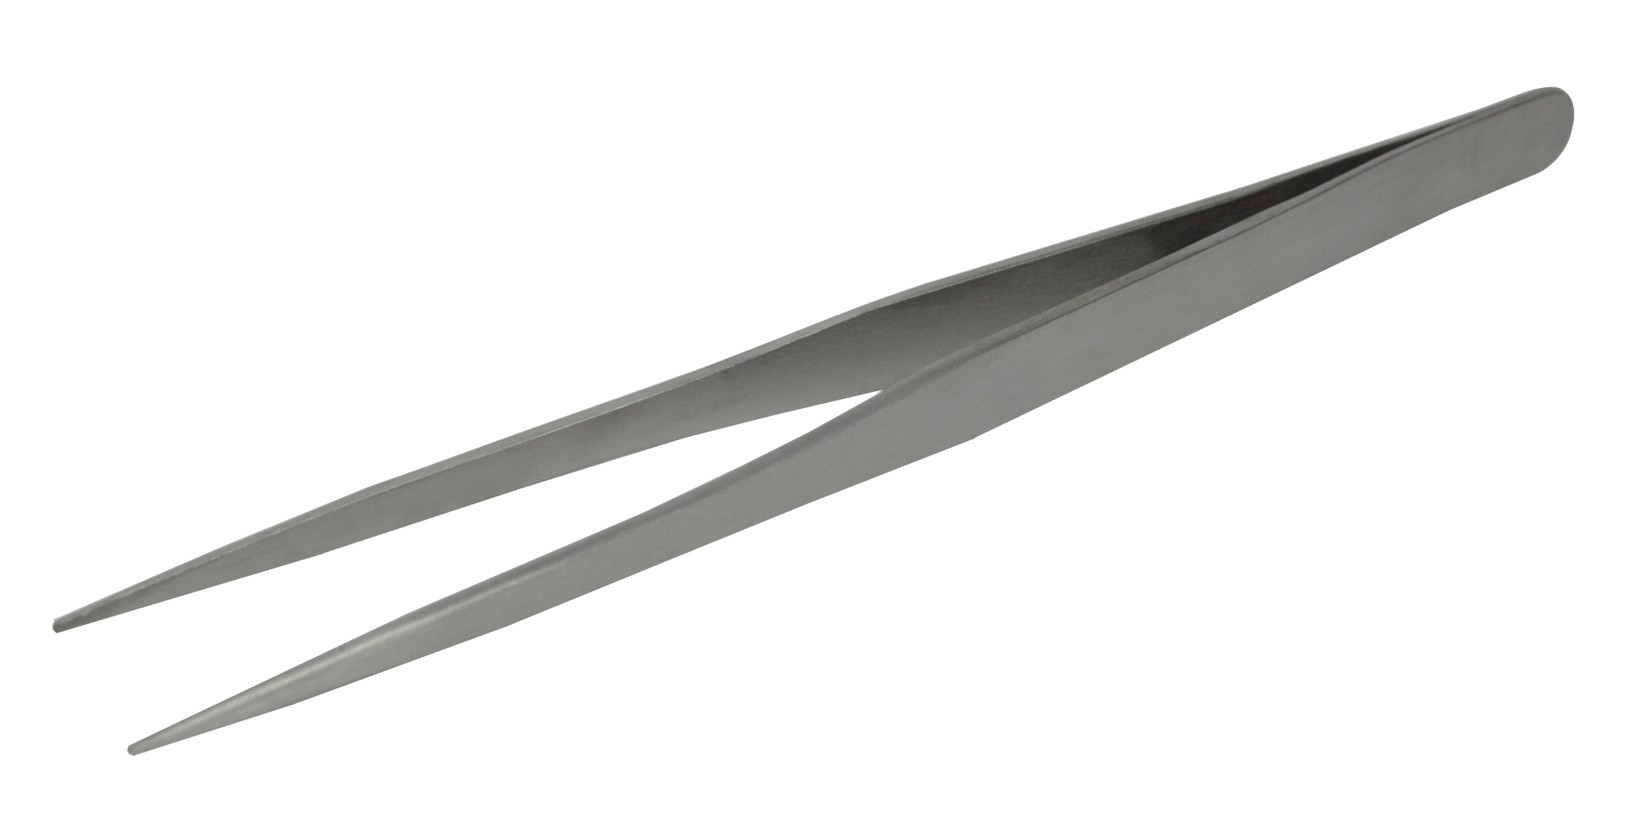 7" Utility Tweezers with Smooth Points for Soldering